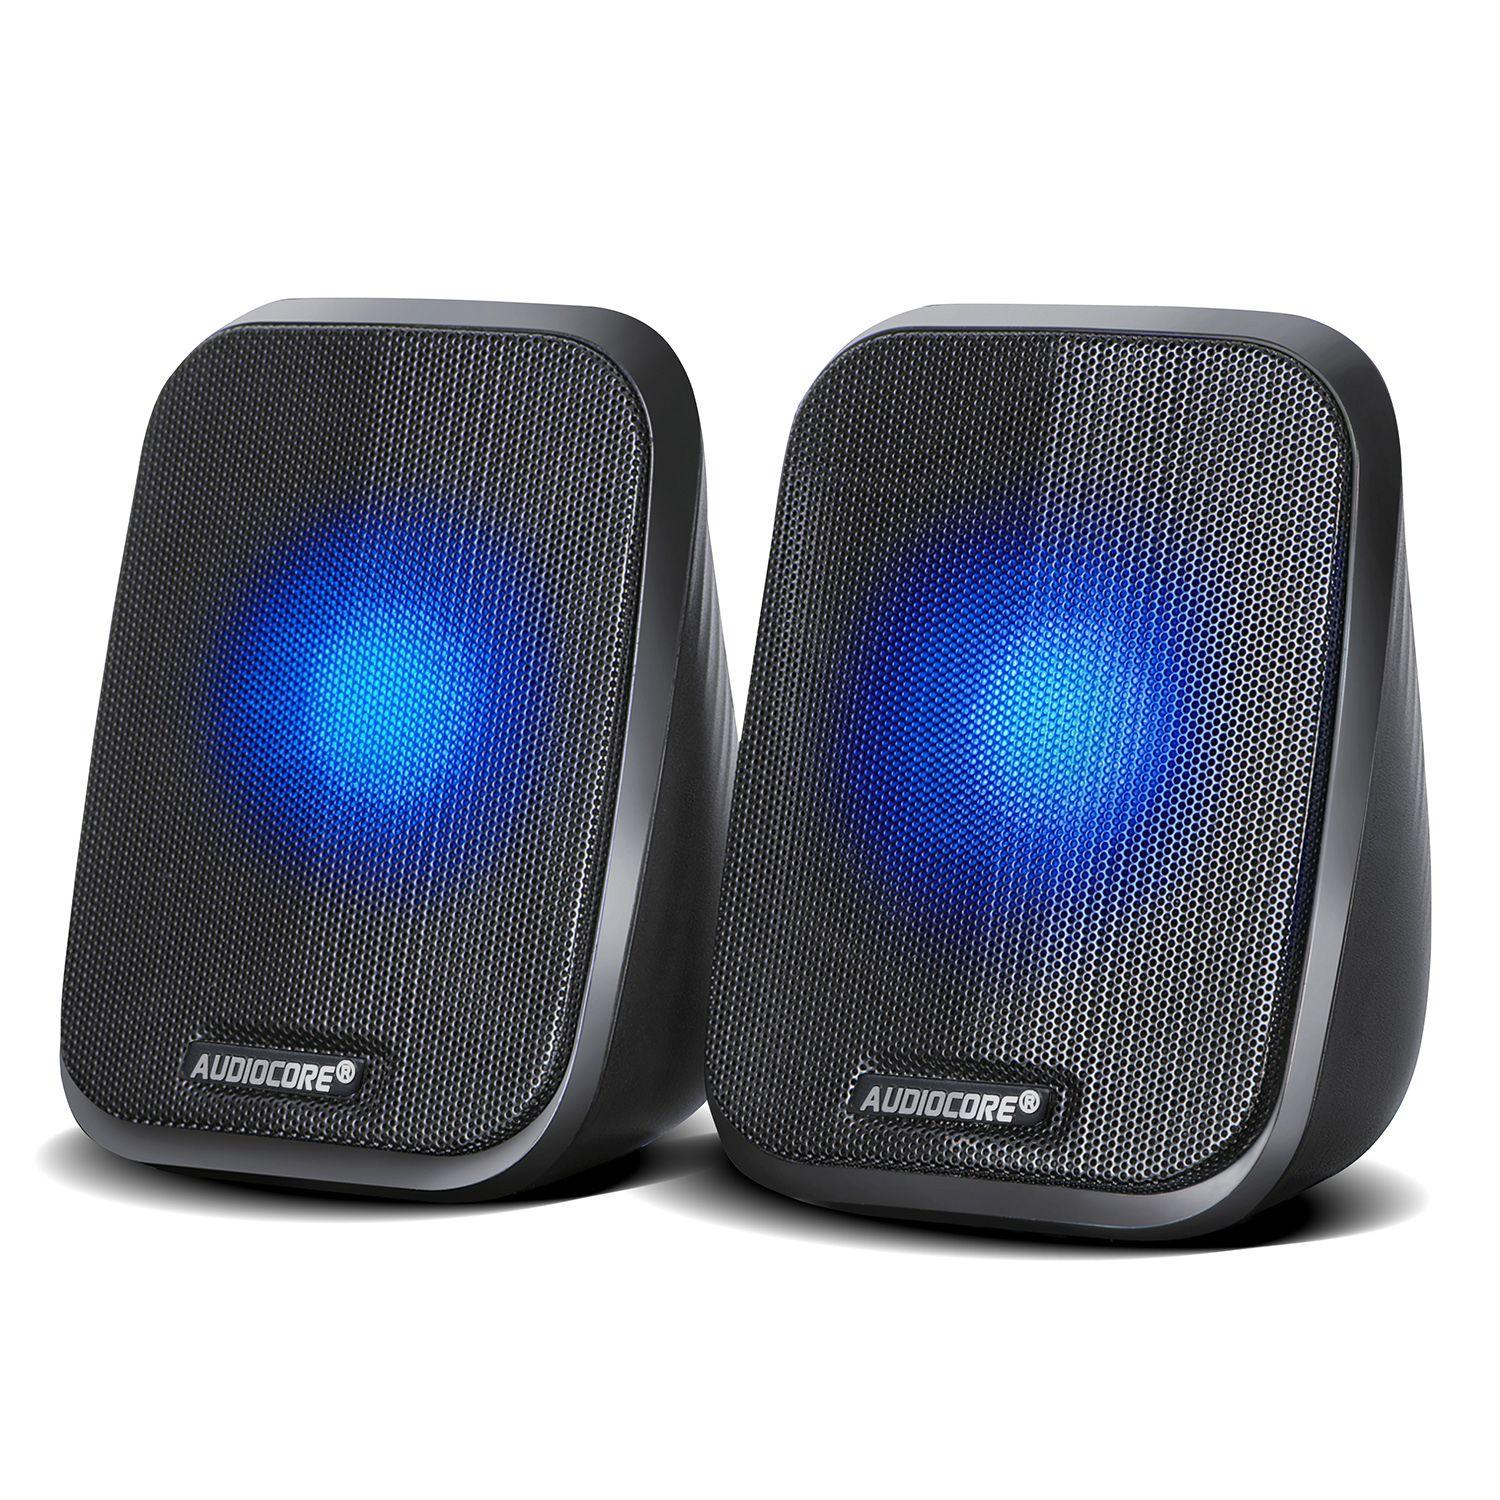 Audiocore AC835 2.0 Stereo Speakers With LED Backlighting For PC Laptop Smartphone